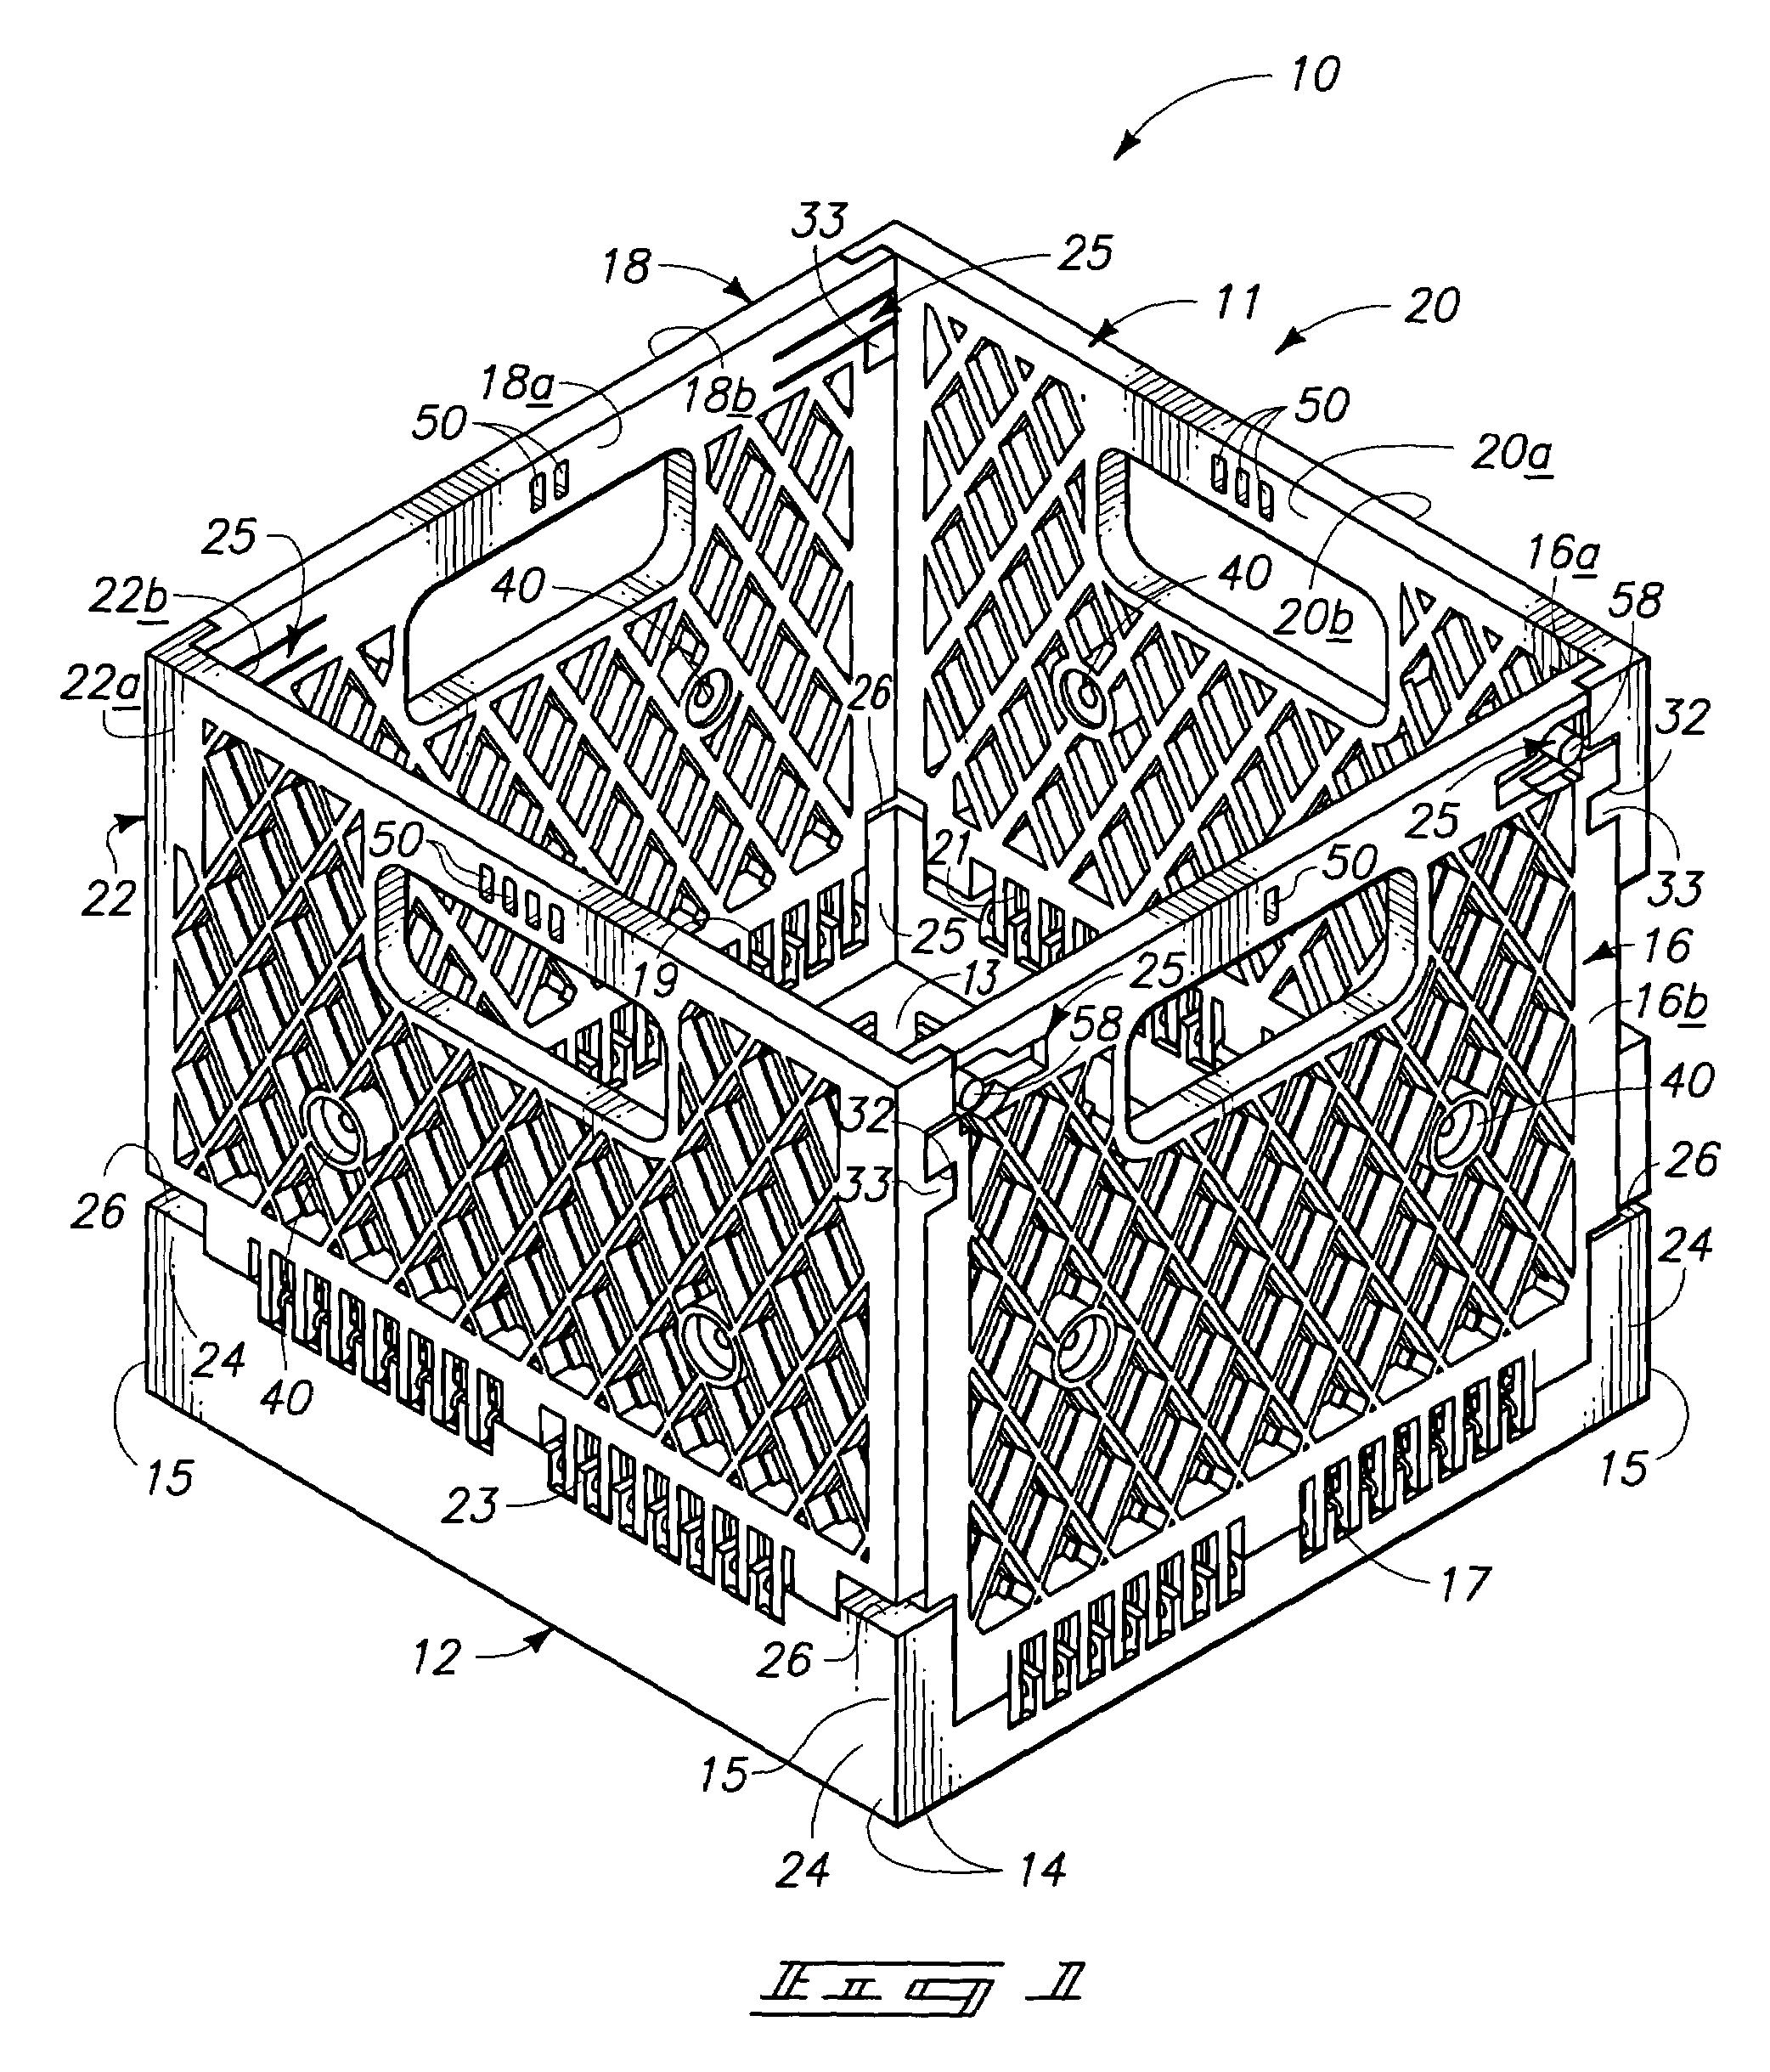 Folding crate with array connection features